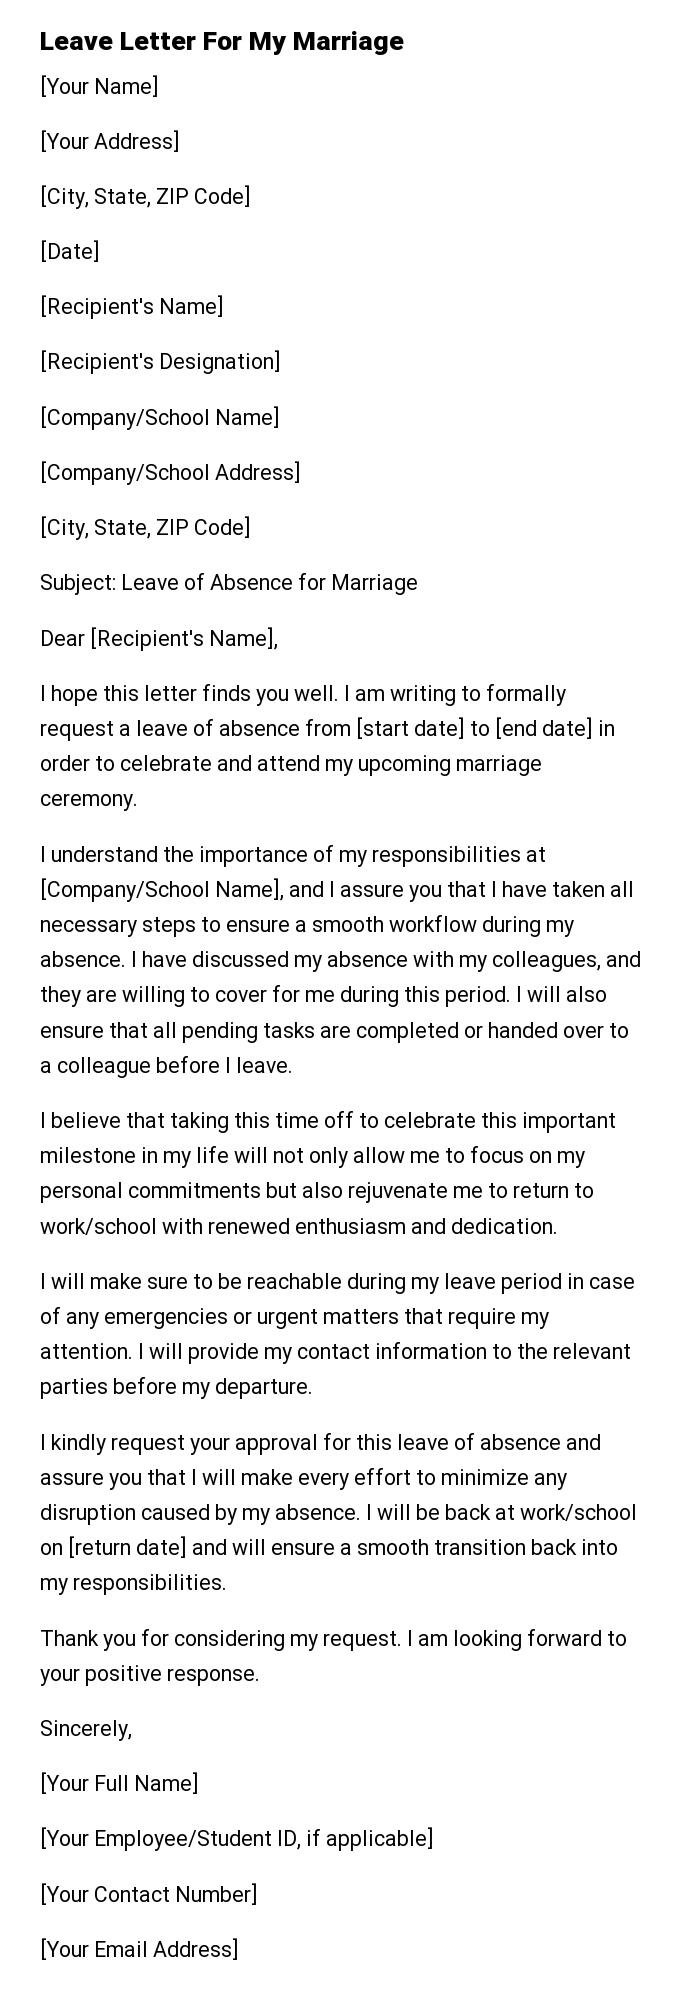 Leave Letter For My Marriage